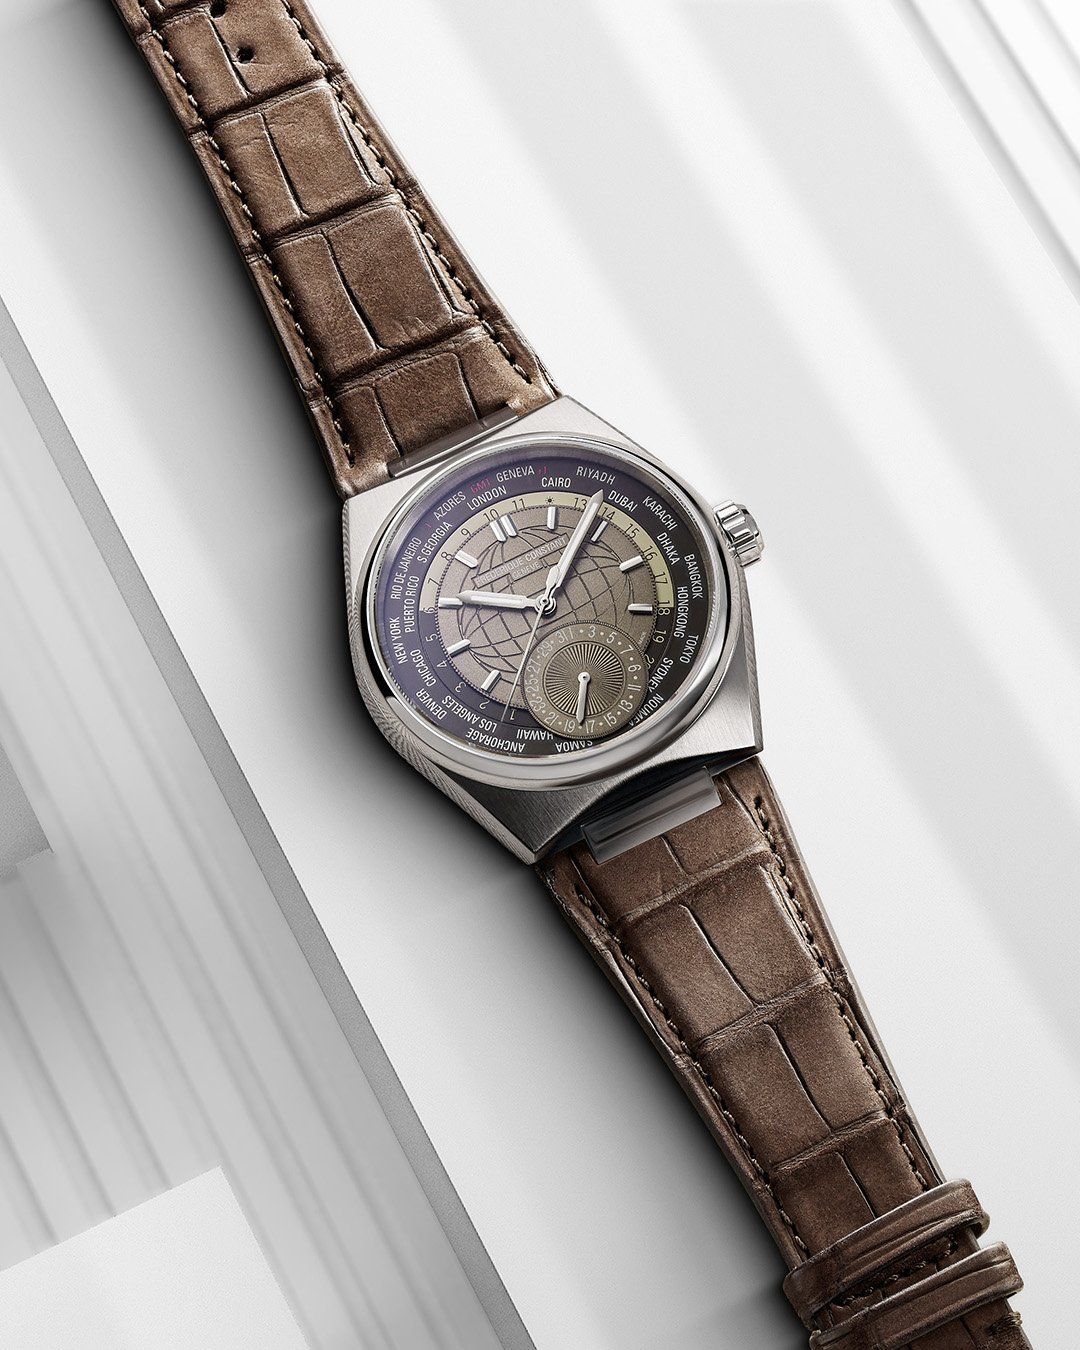 Frederique Constant expands its worldtimer series with the release of the all-new Highlife Worldtimer